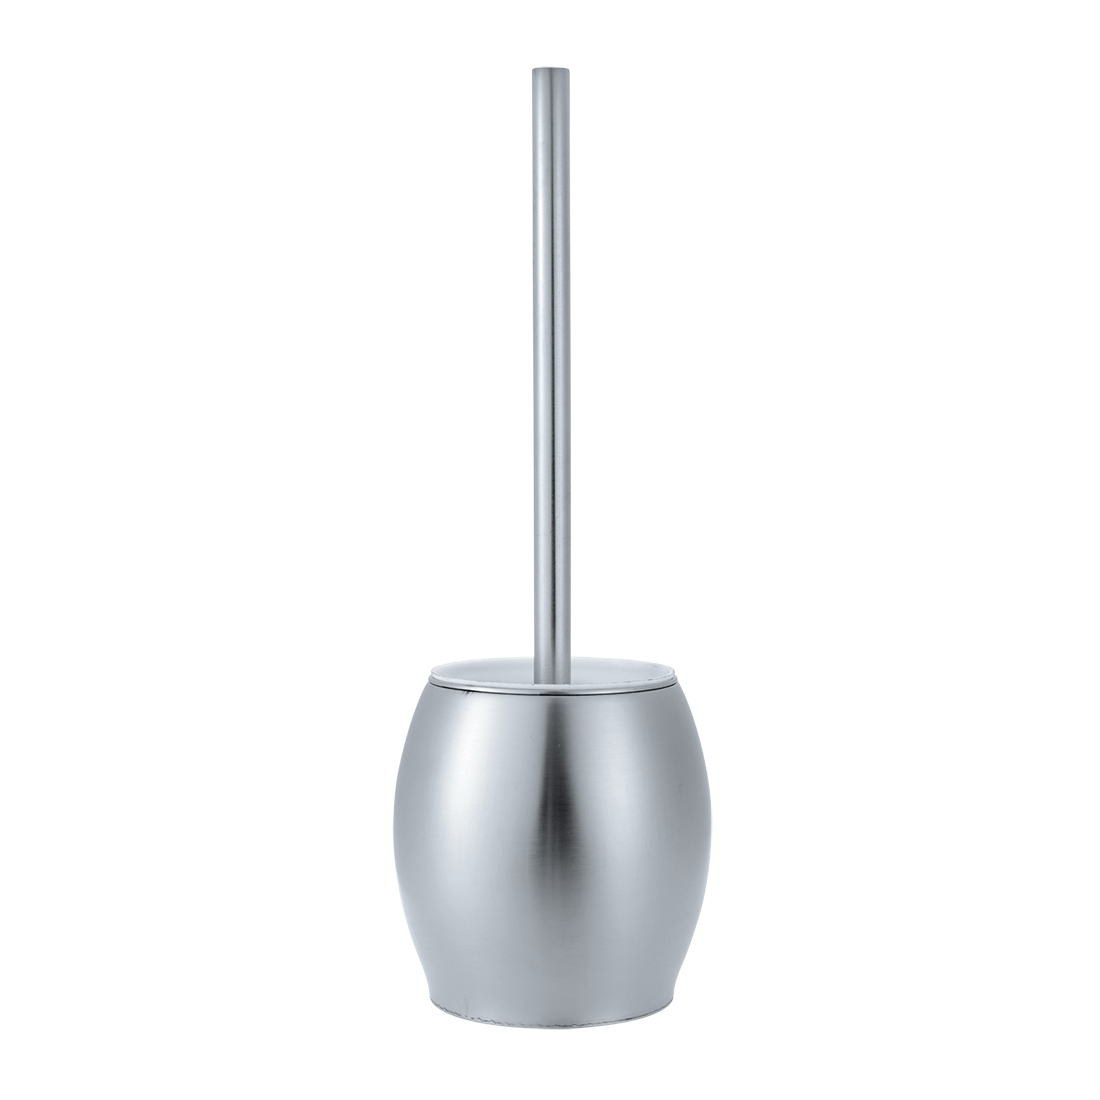 Stainless Steel Bathroom Toilet Brush & Round Holder Free Standing Cleaning Set